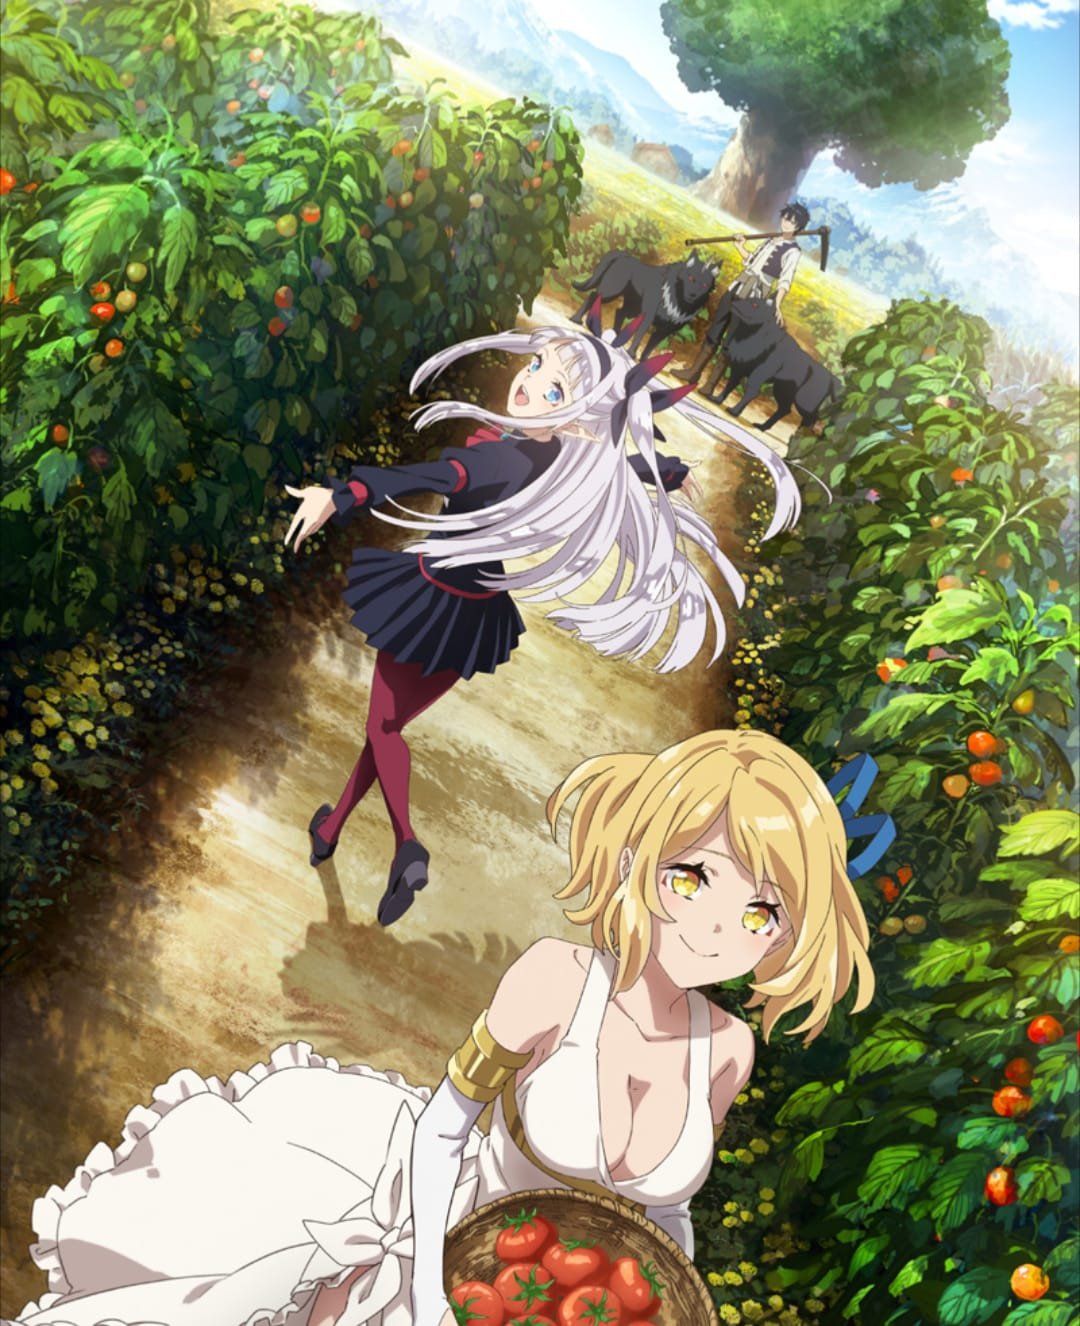 Why You Should Watch This 12 Episode Feel Good Isekai Anime